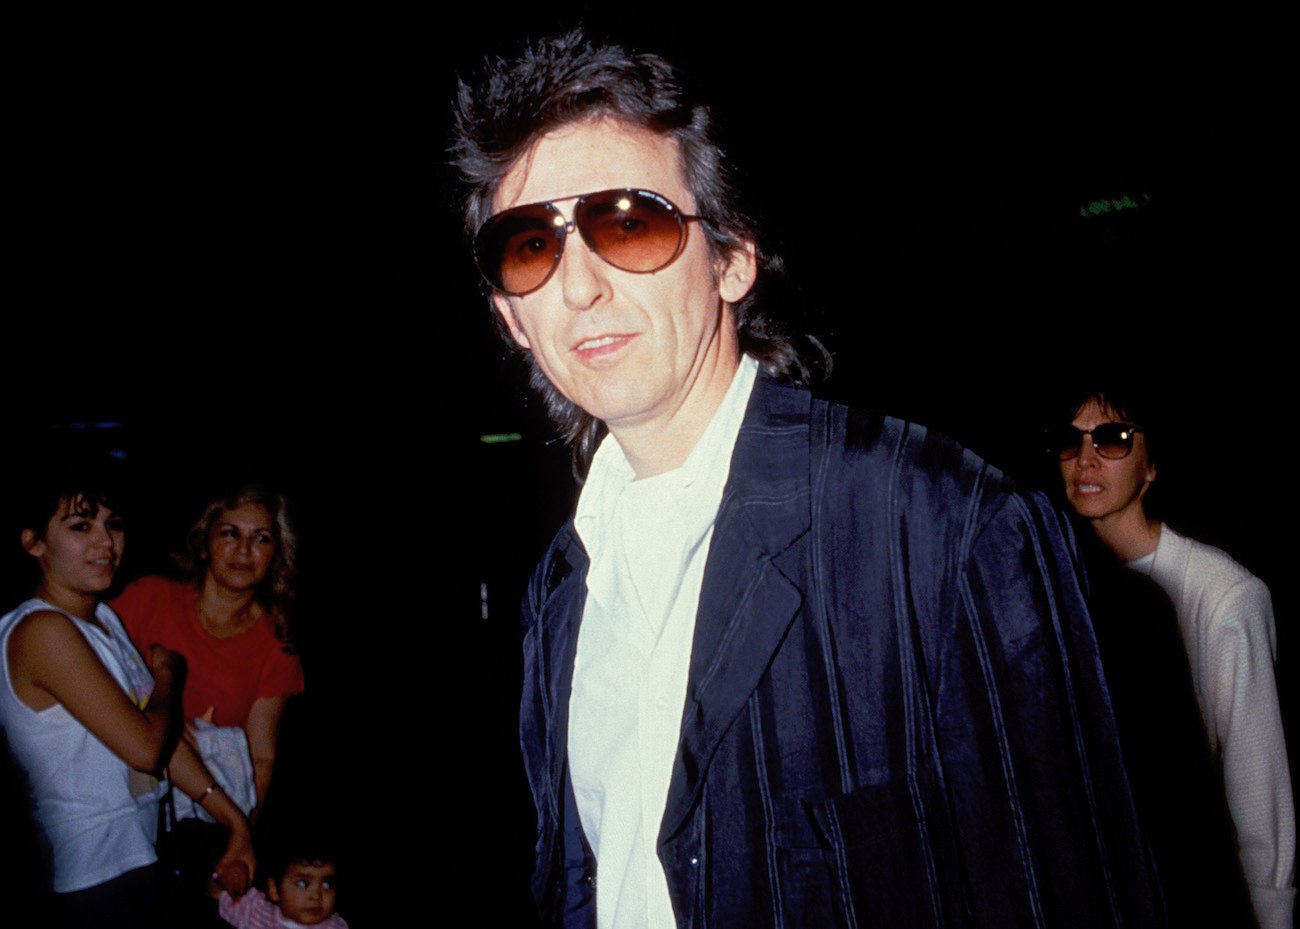 George Harrison wearing sunglasses at LAX Airport in 1988.